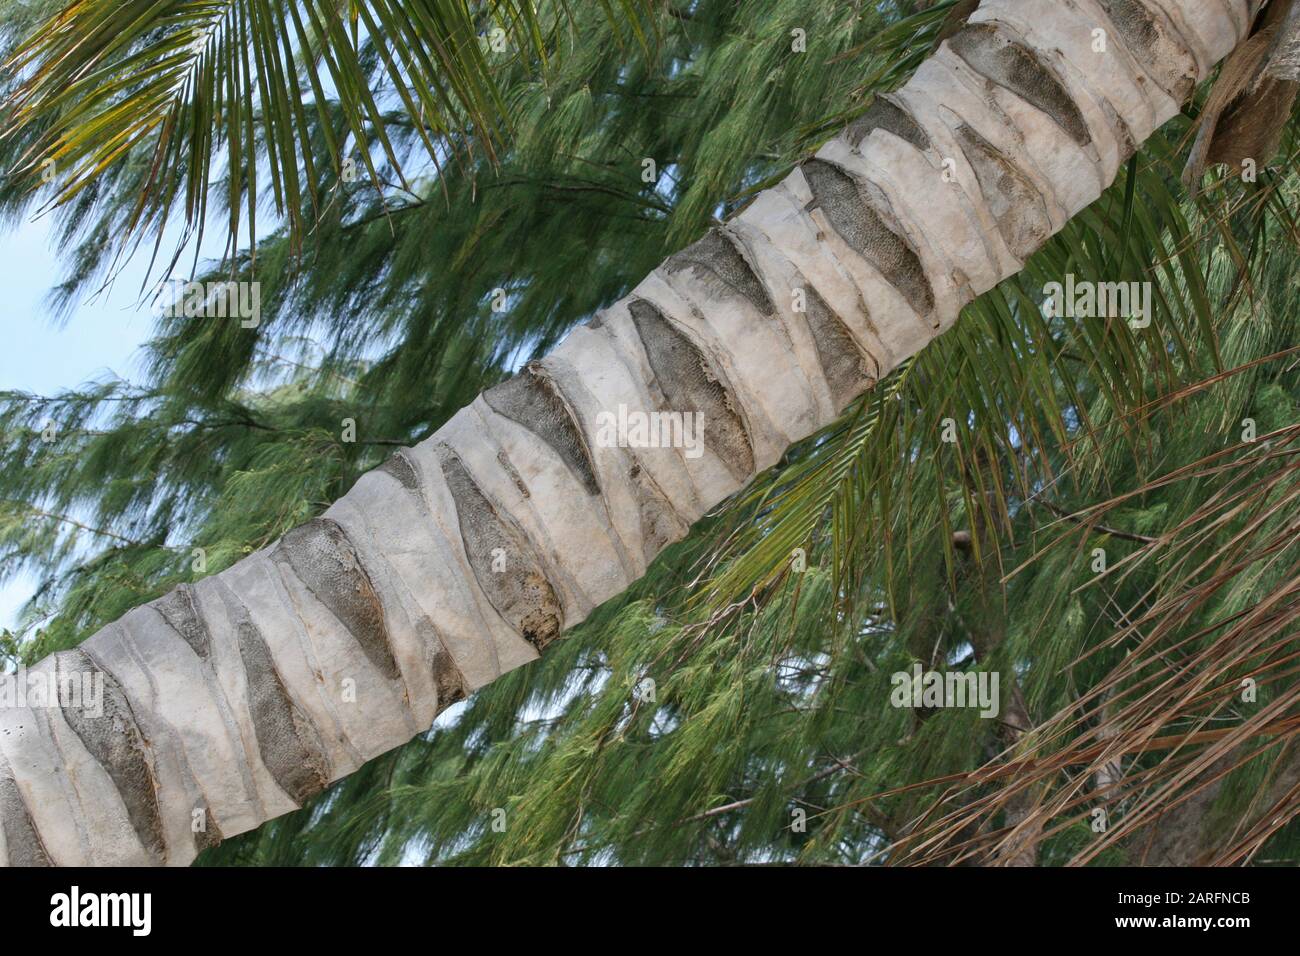 Close-up of coconut palm tree trunk and bark, Curieuse Island, Seychelles. Stock Photo